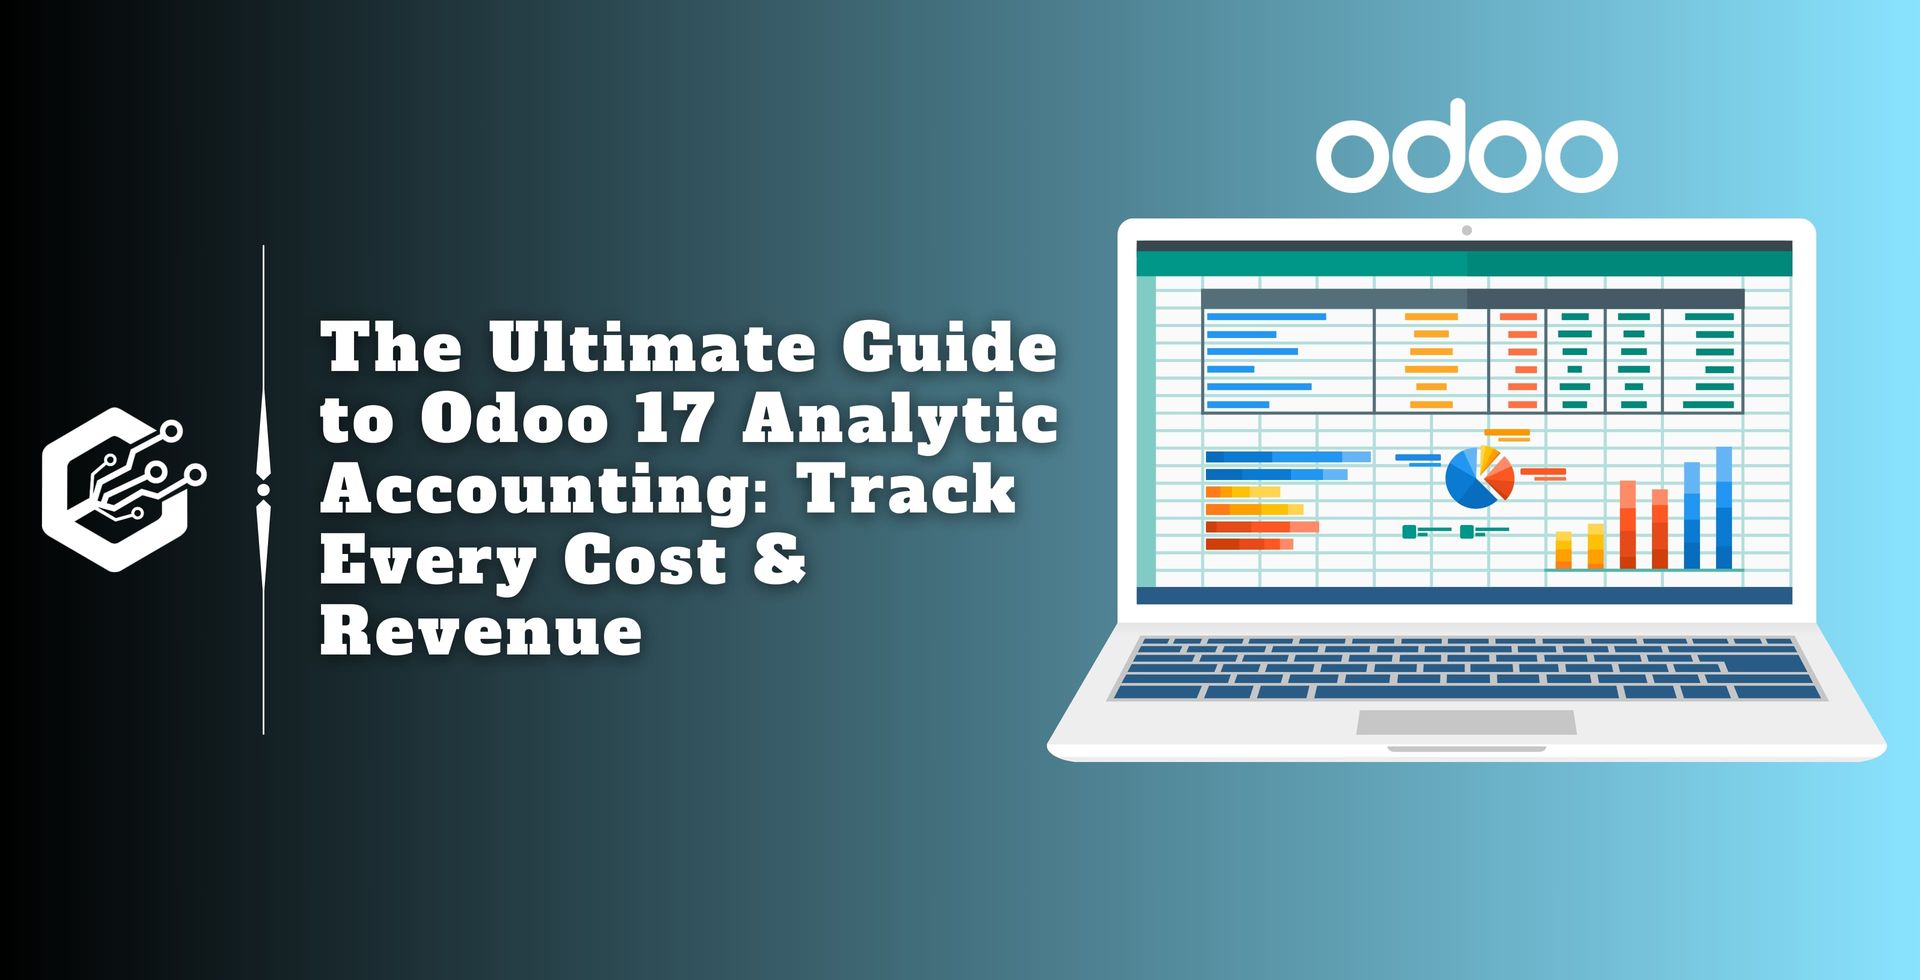 The Ultimate Guide to Odoo 17 Analytic Accounting: Track Every Cost & Revenue | CandidRoot